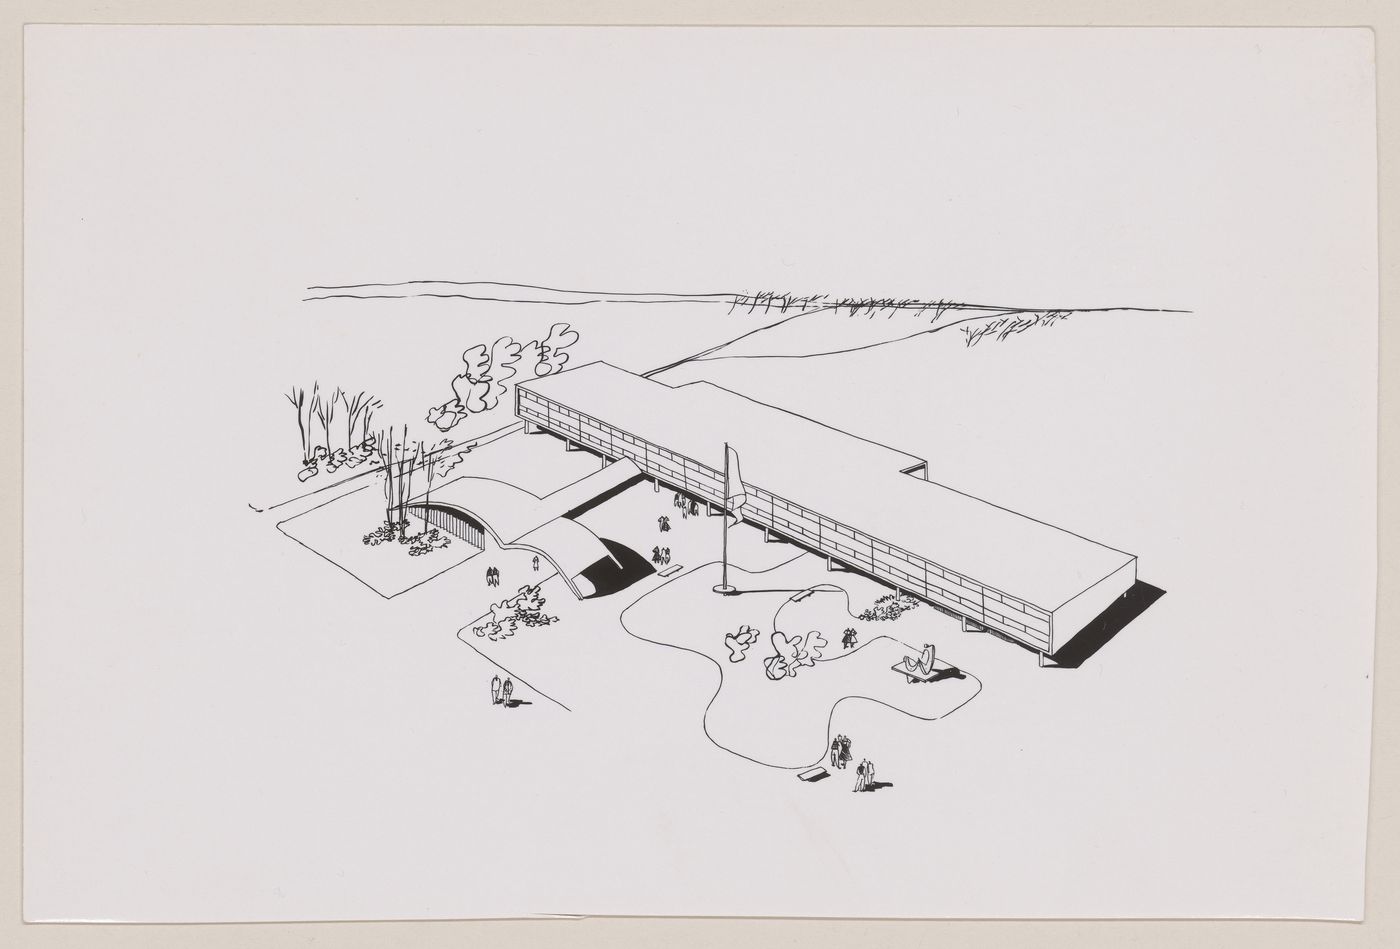 Photograph of drawing of an unidentified building, possibly a school
